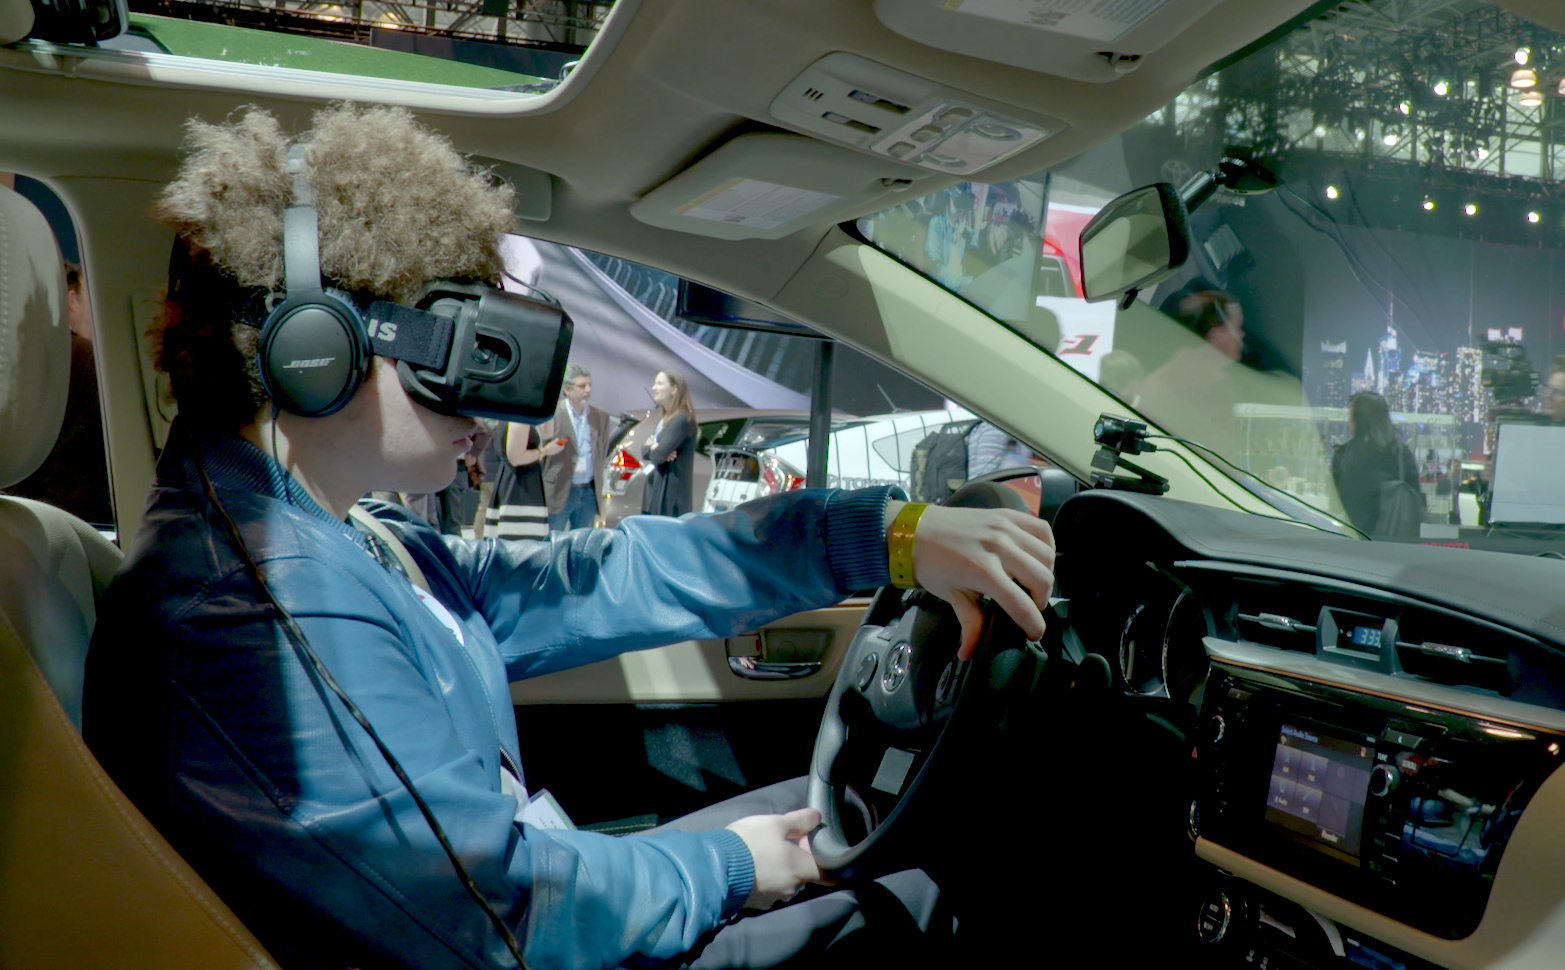 virtual reality to fight distracted driving - CBS News